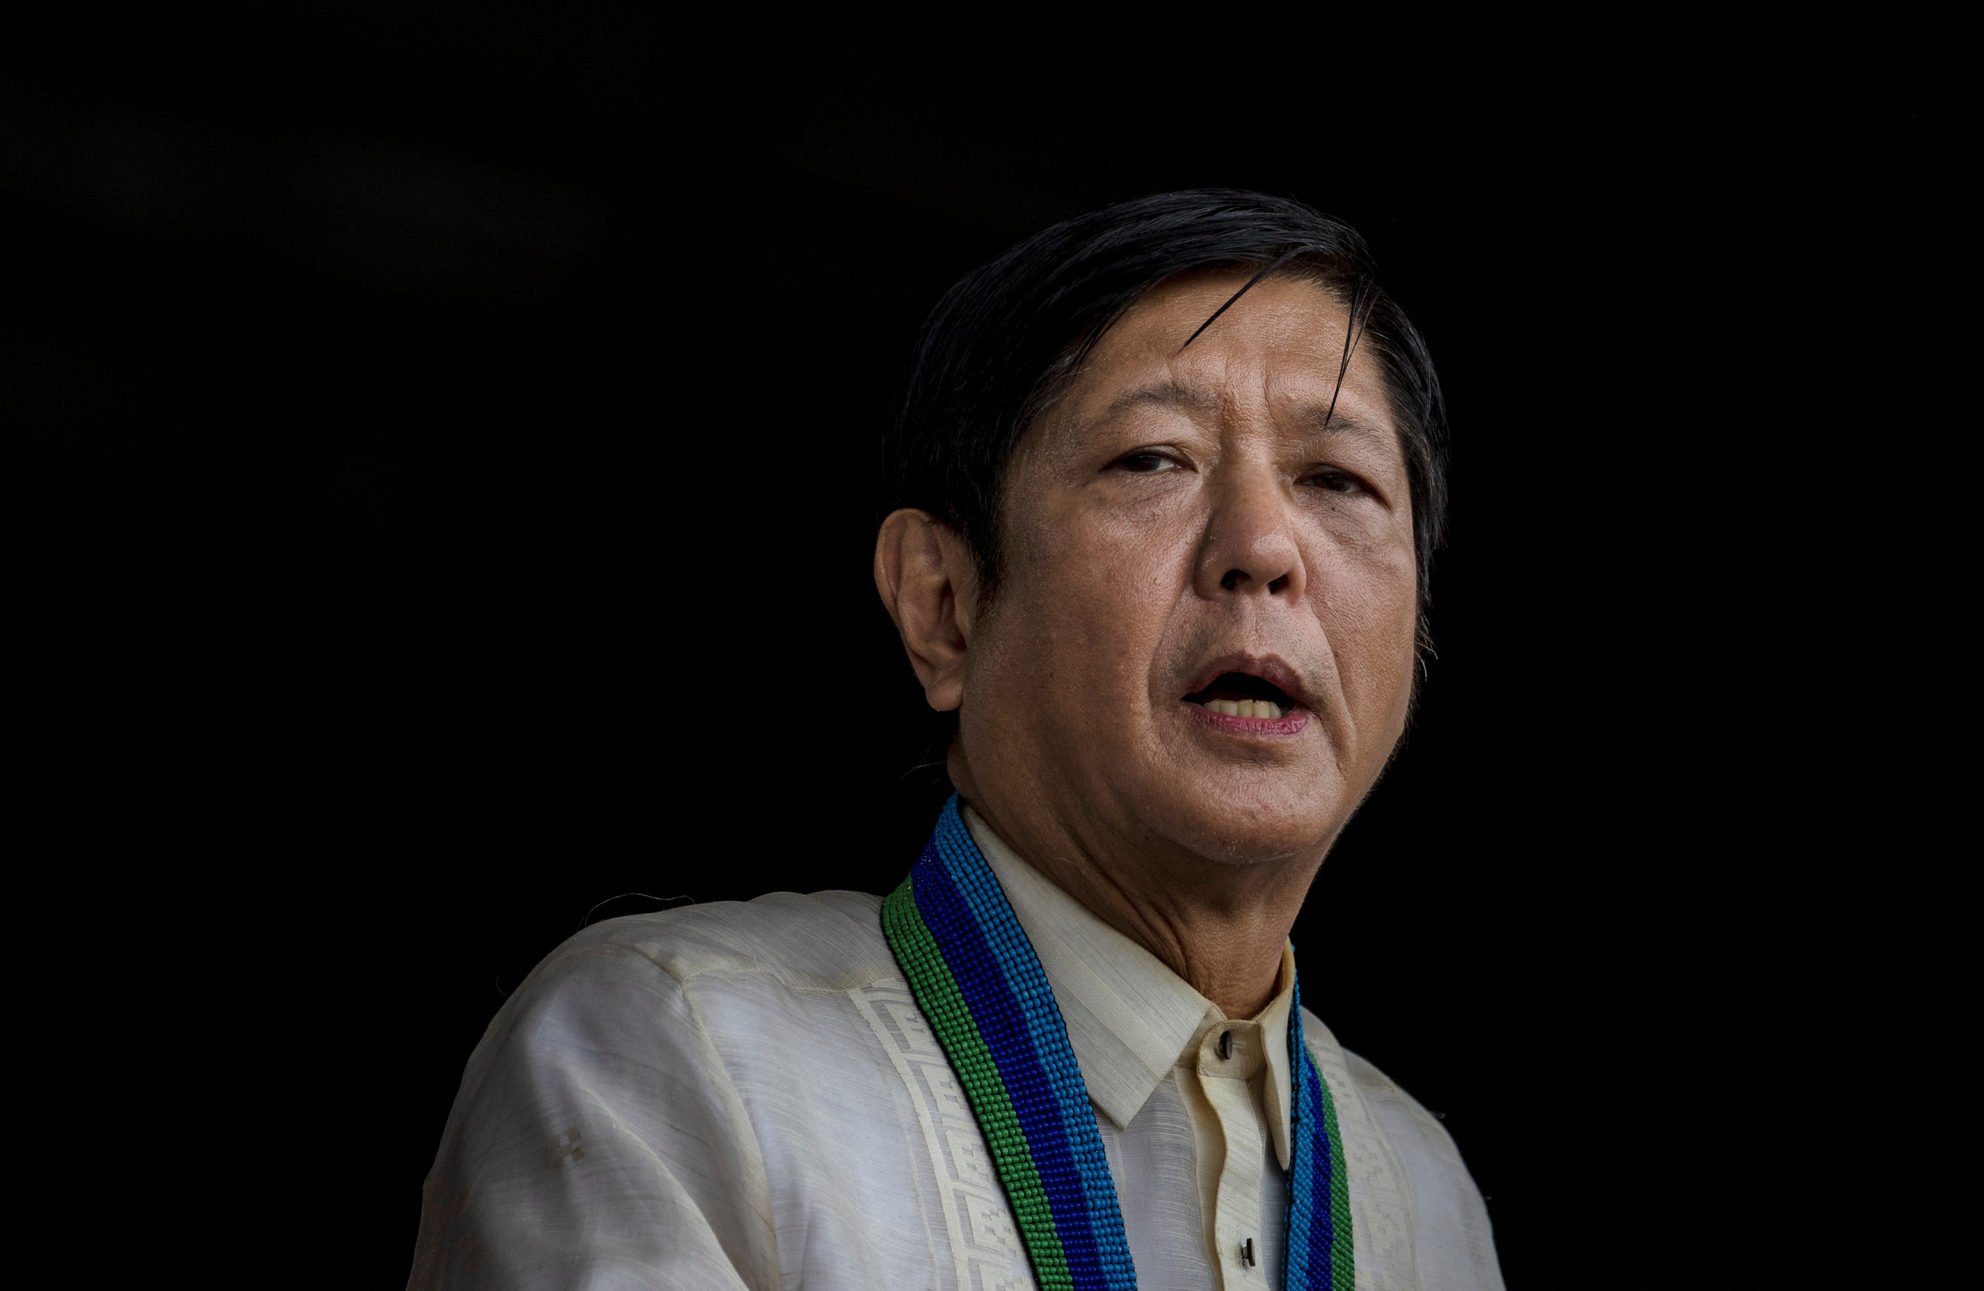 President Ferdinand Marcos Jr. will present the country’s economic performance before global leaders and top chief executive officers (CEOs) at the World Economic Forum (WEF) in Davos, Switzerland.